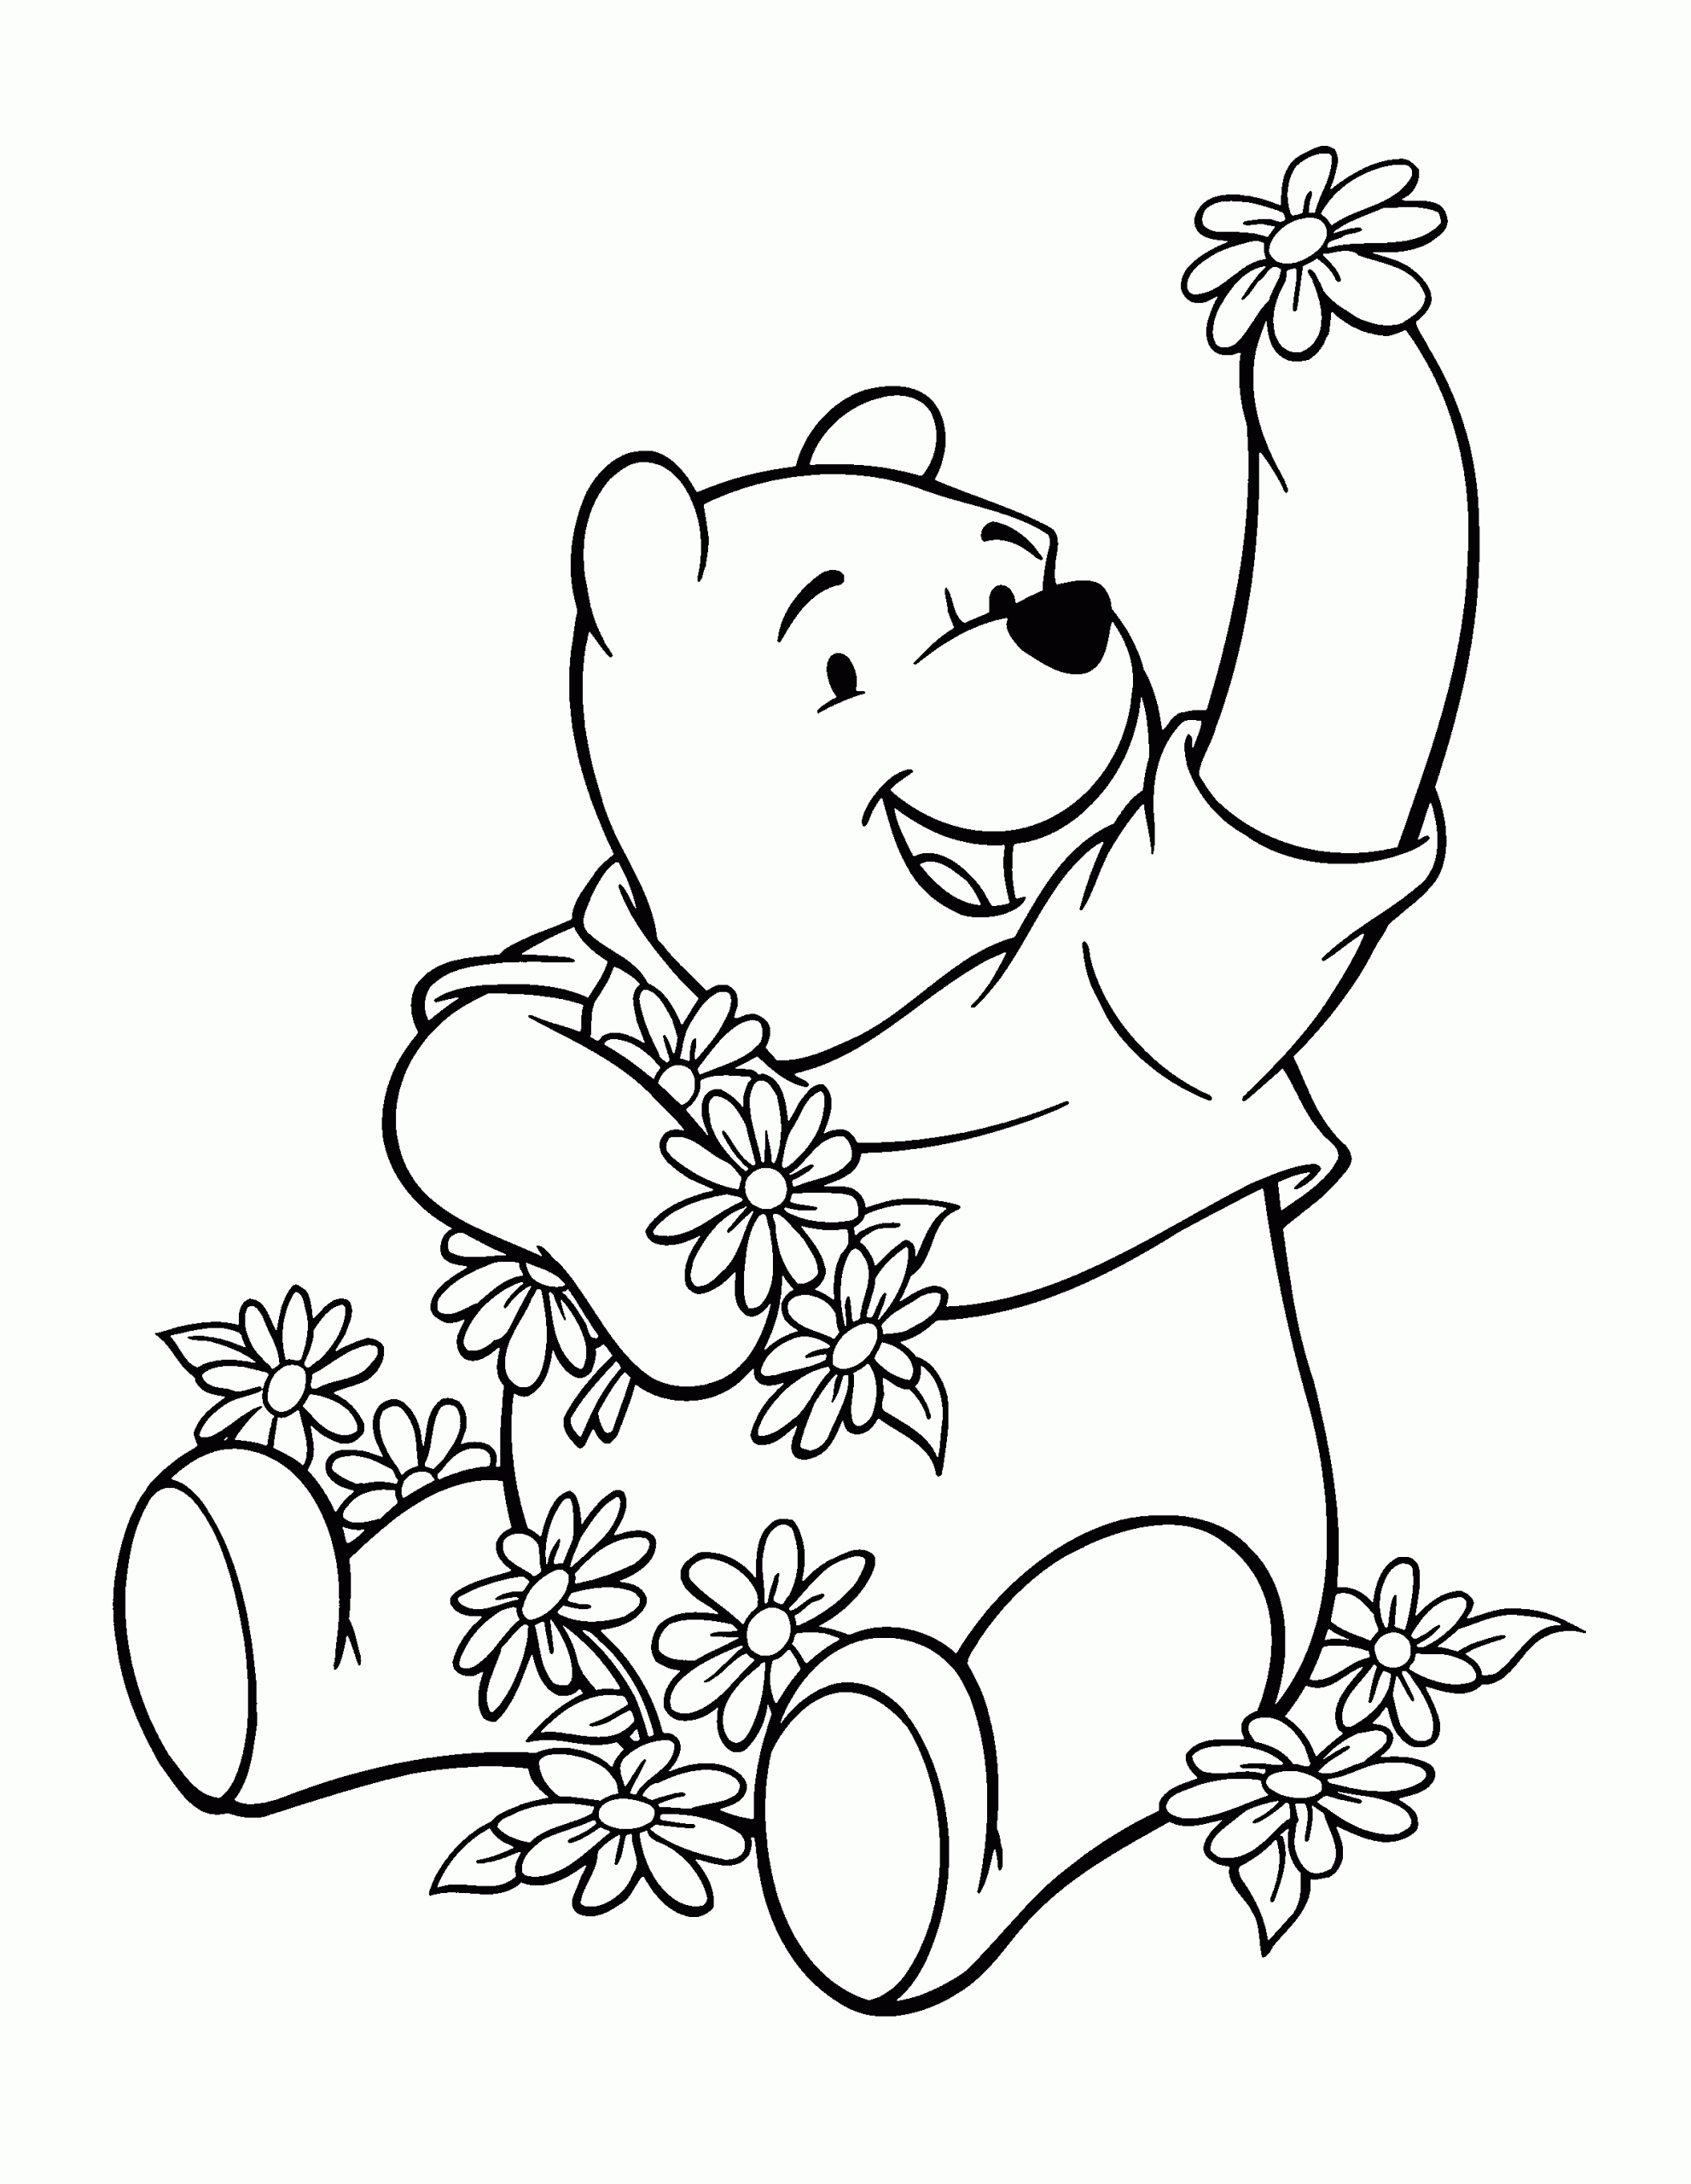 Free Printable Baby Winnie the Pooh Coloring Pages   Coloring Cool